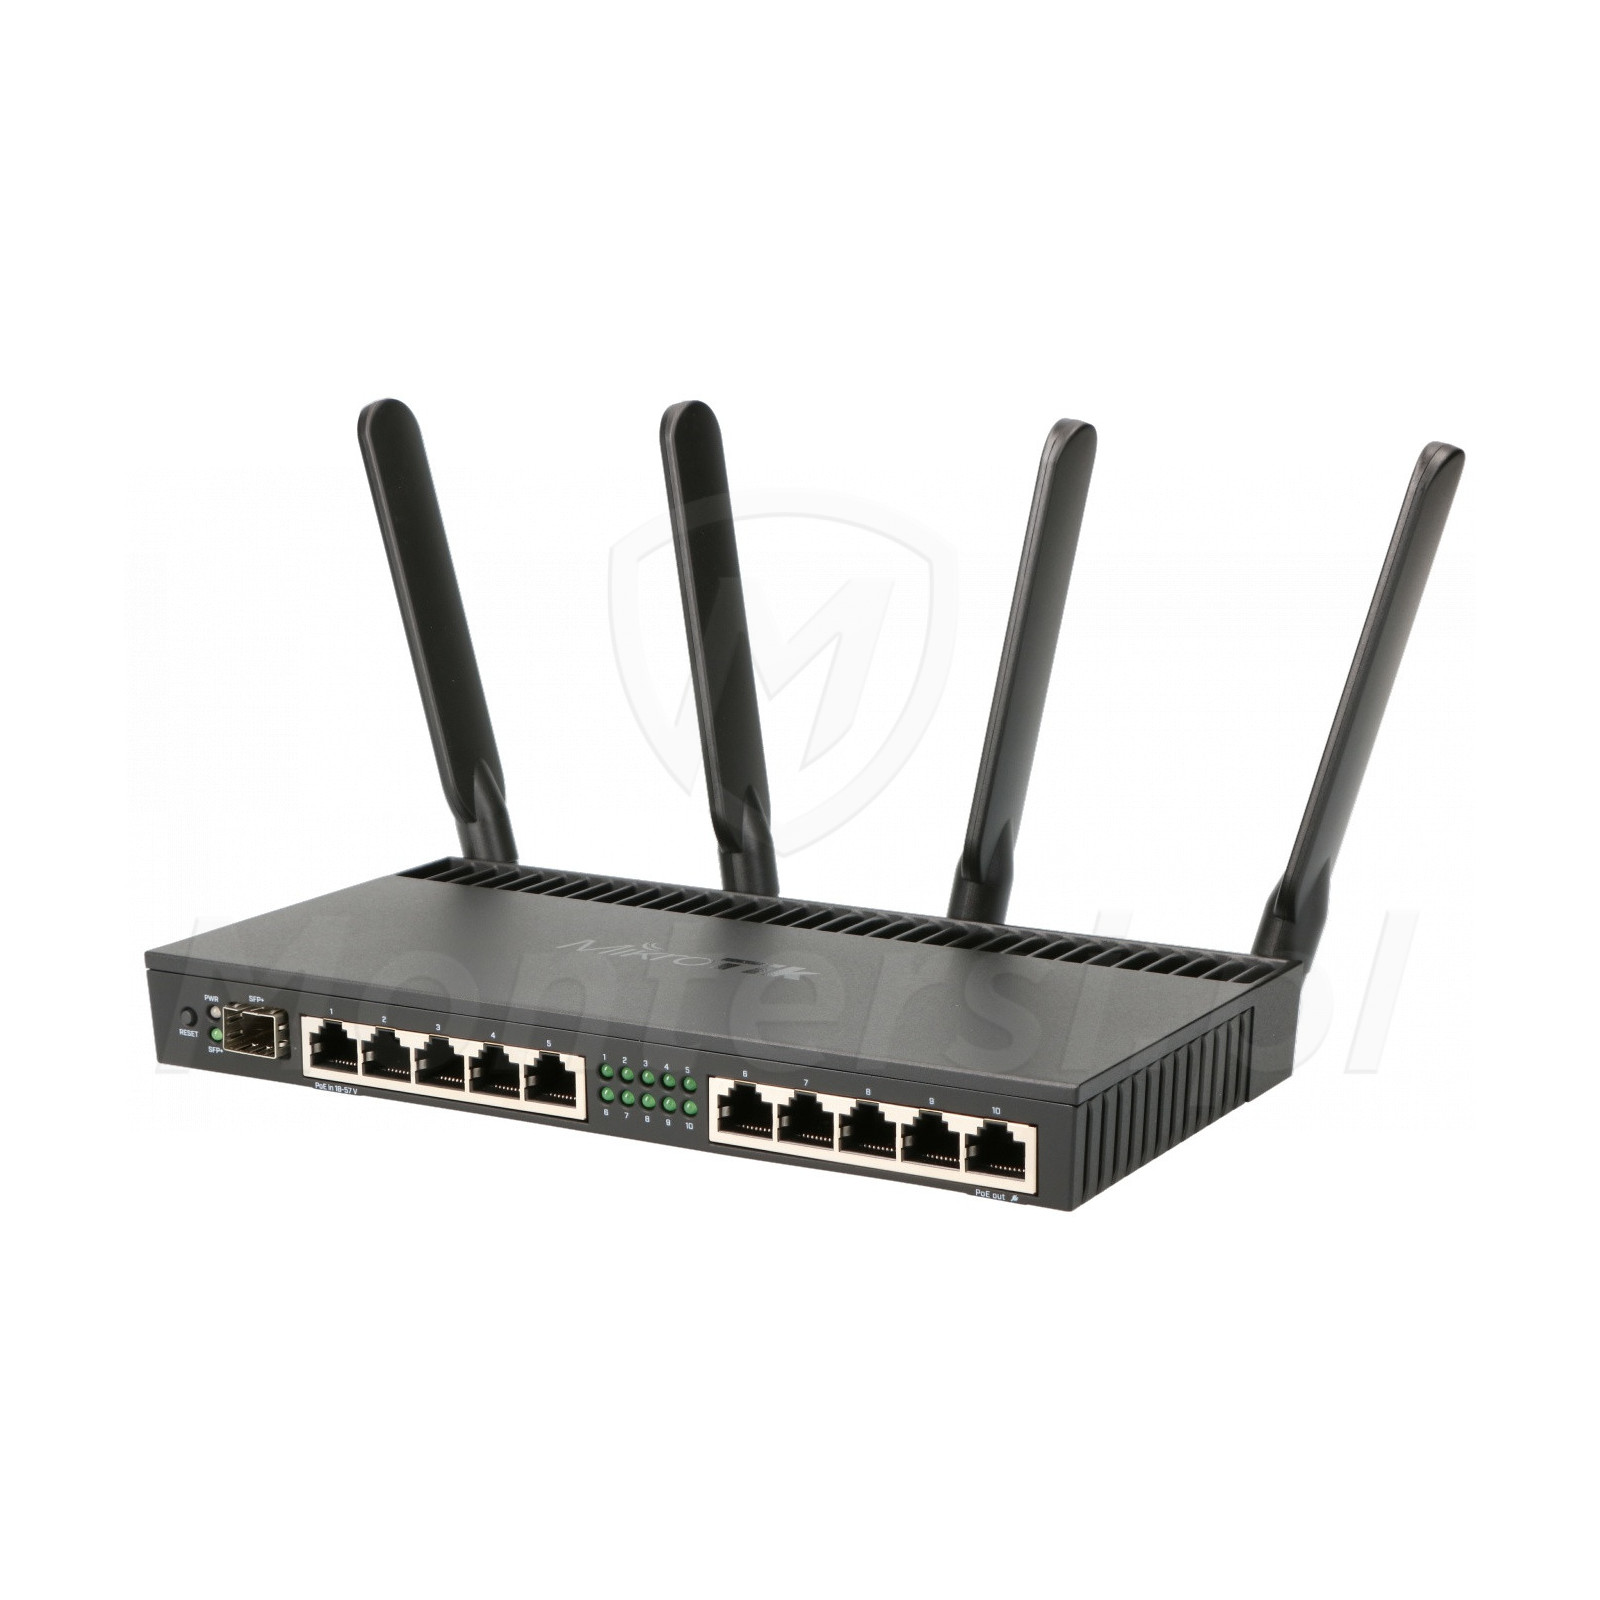 RB4011iGS - Router DualBand Mikrotik